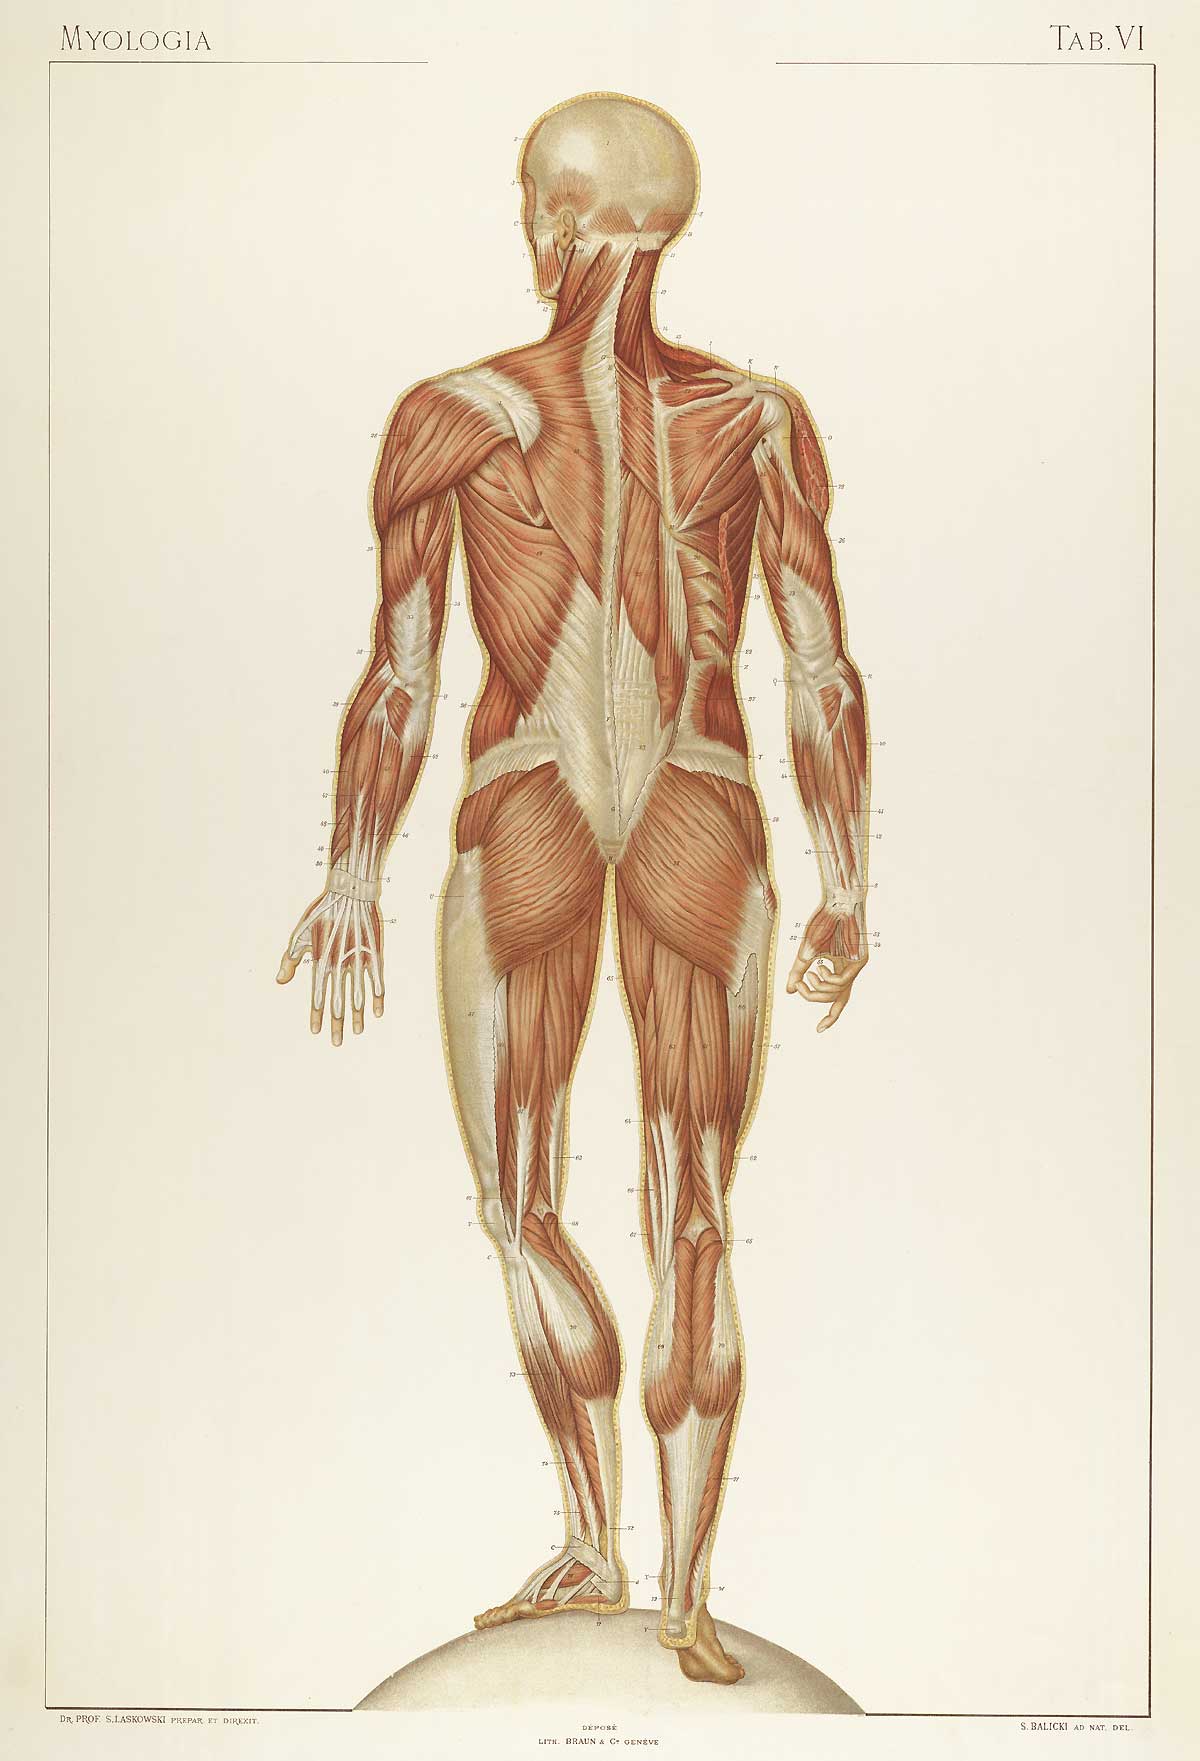 Plate 6 of Sigismond Laskowski's Anatomie normale du corps humain, featuring the posterior view of a flayed corpse standing on a sphere displaying the muscles of the back of the body.